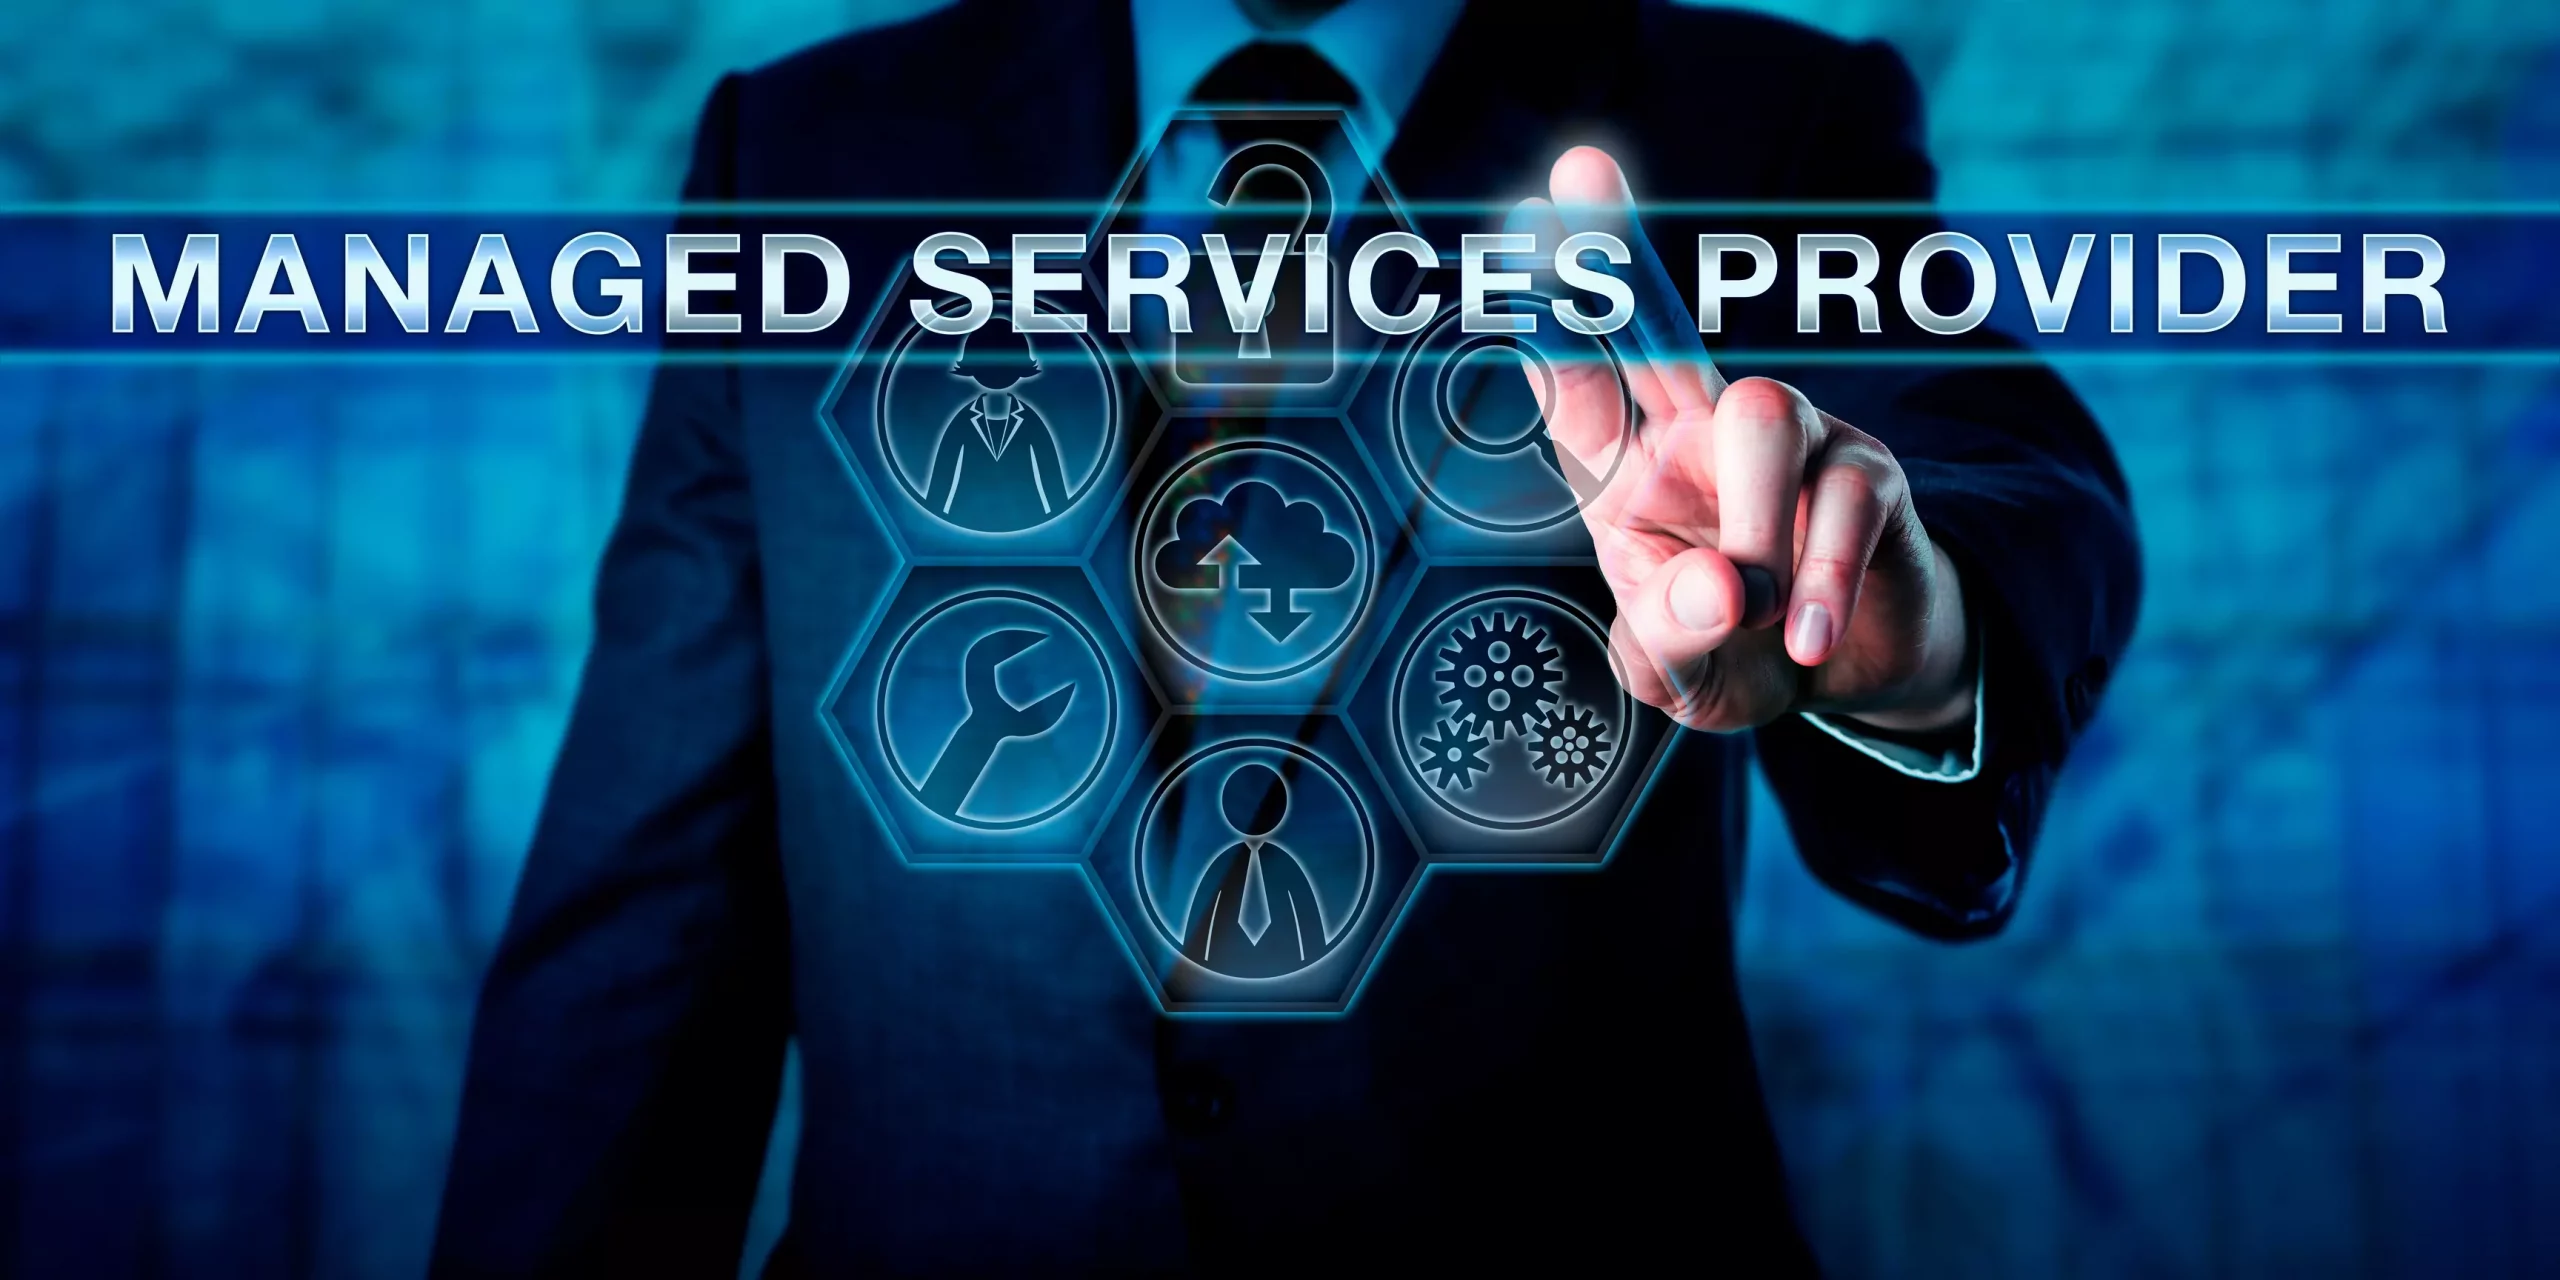 5 Benefits of a Managed Services Provider (MSP)